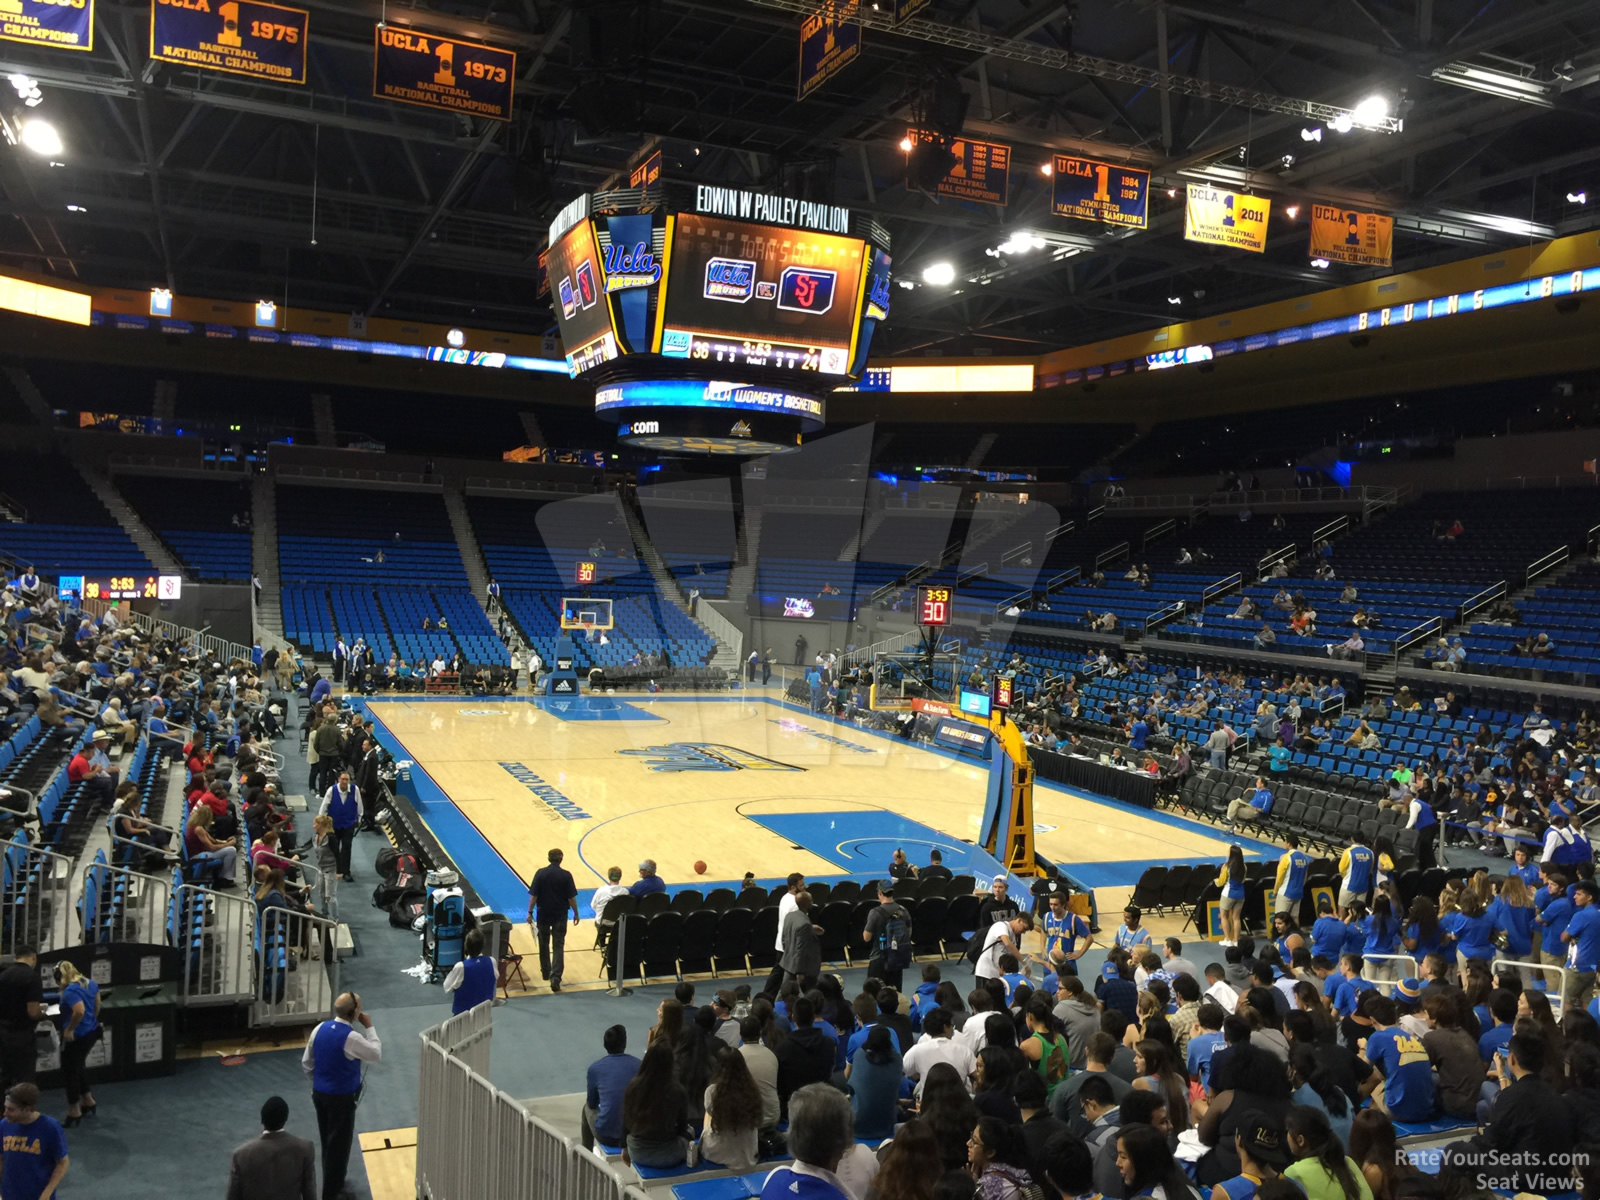 section 123, row 3 seat view  - pauley pavilion